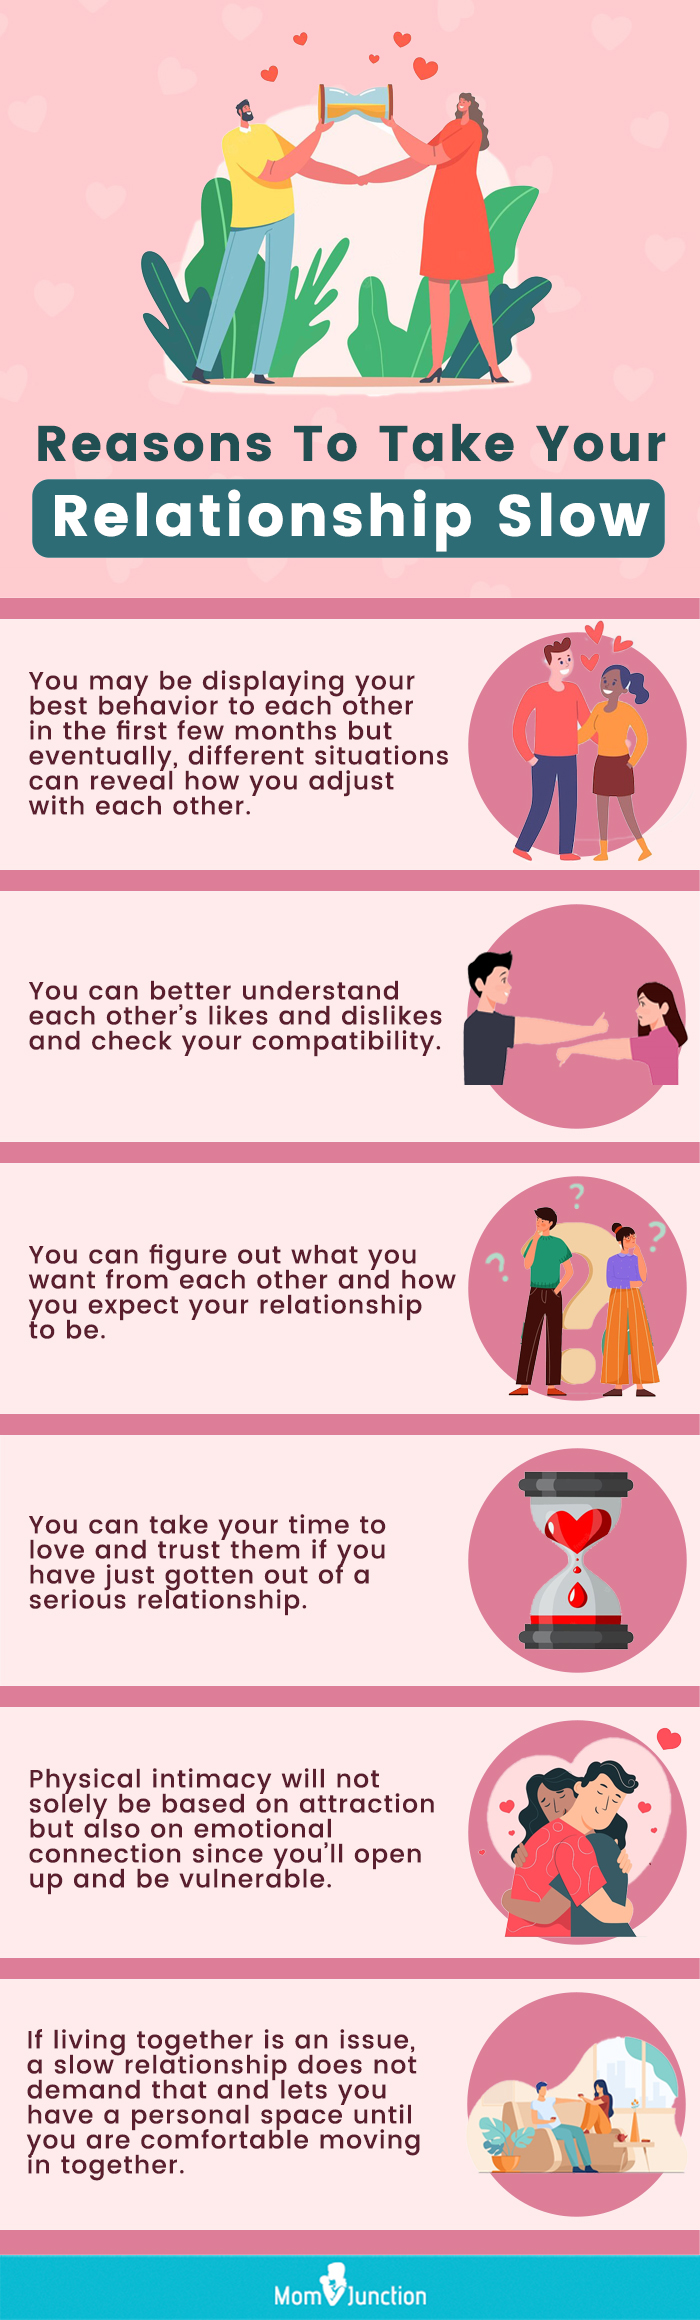 reasons to take your relationship slow [infographic]